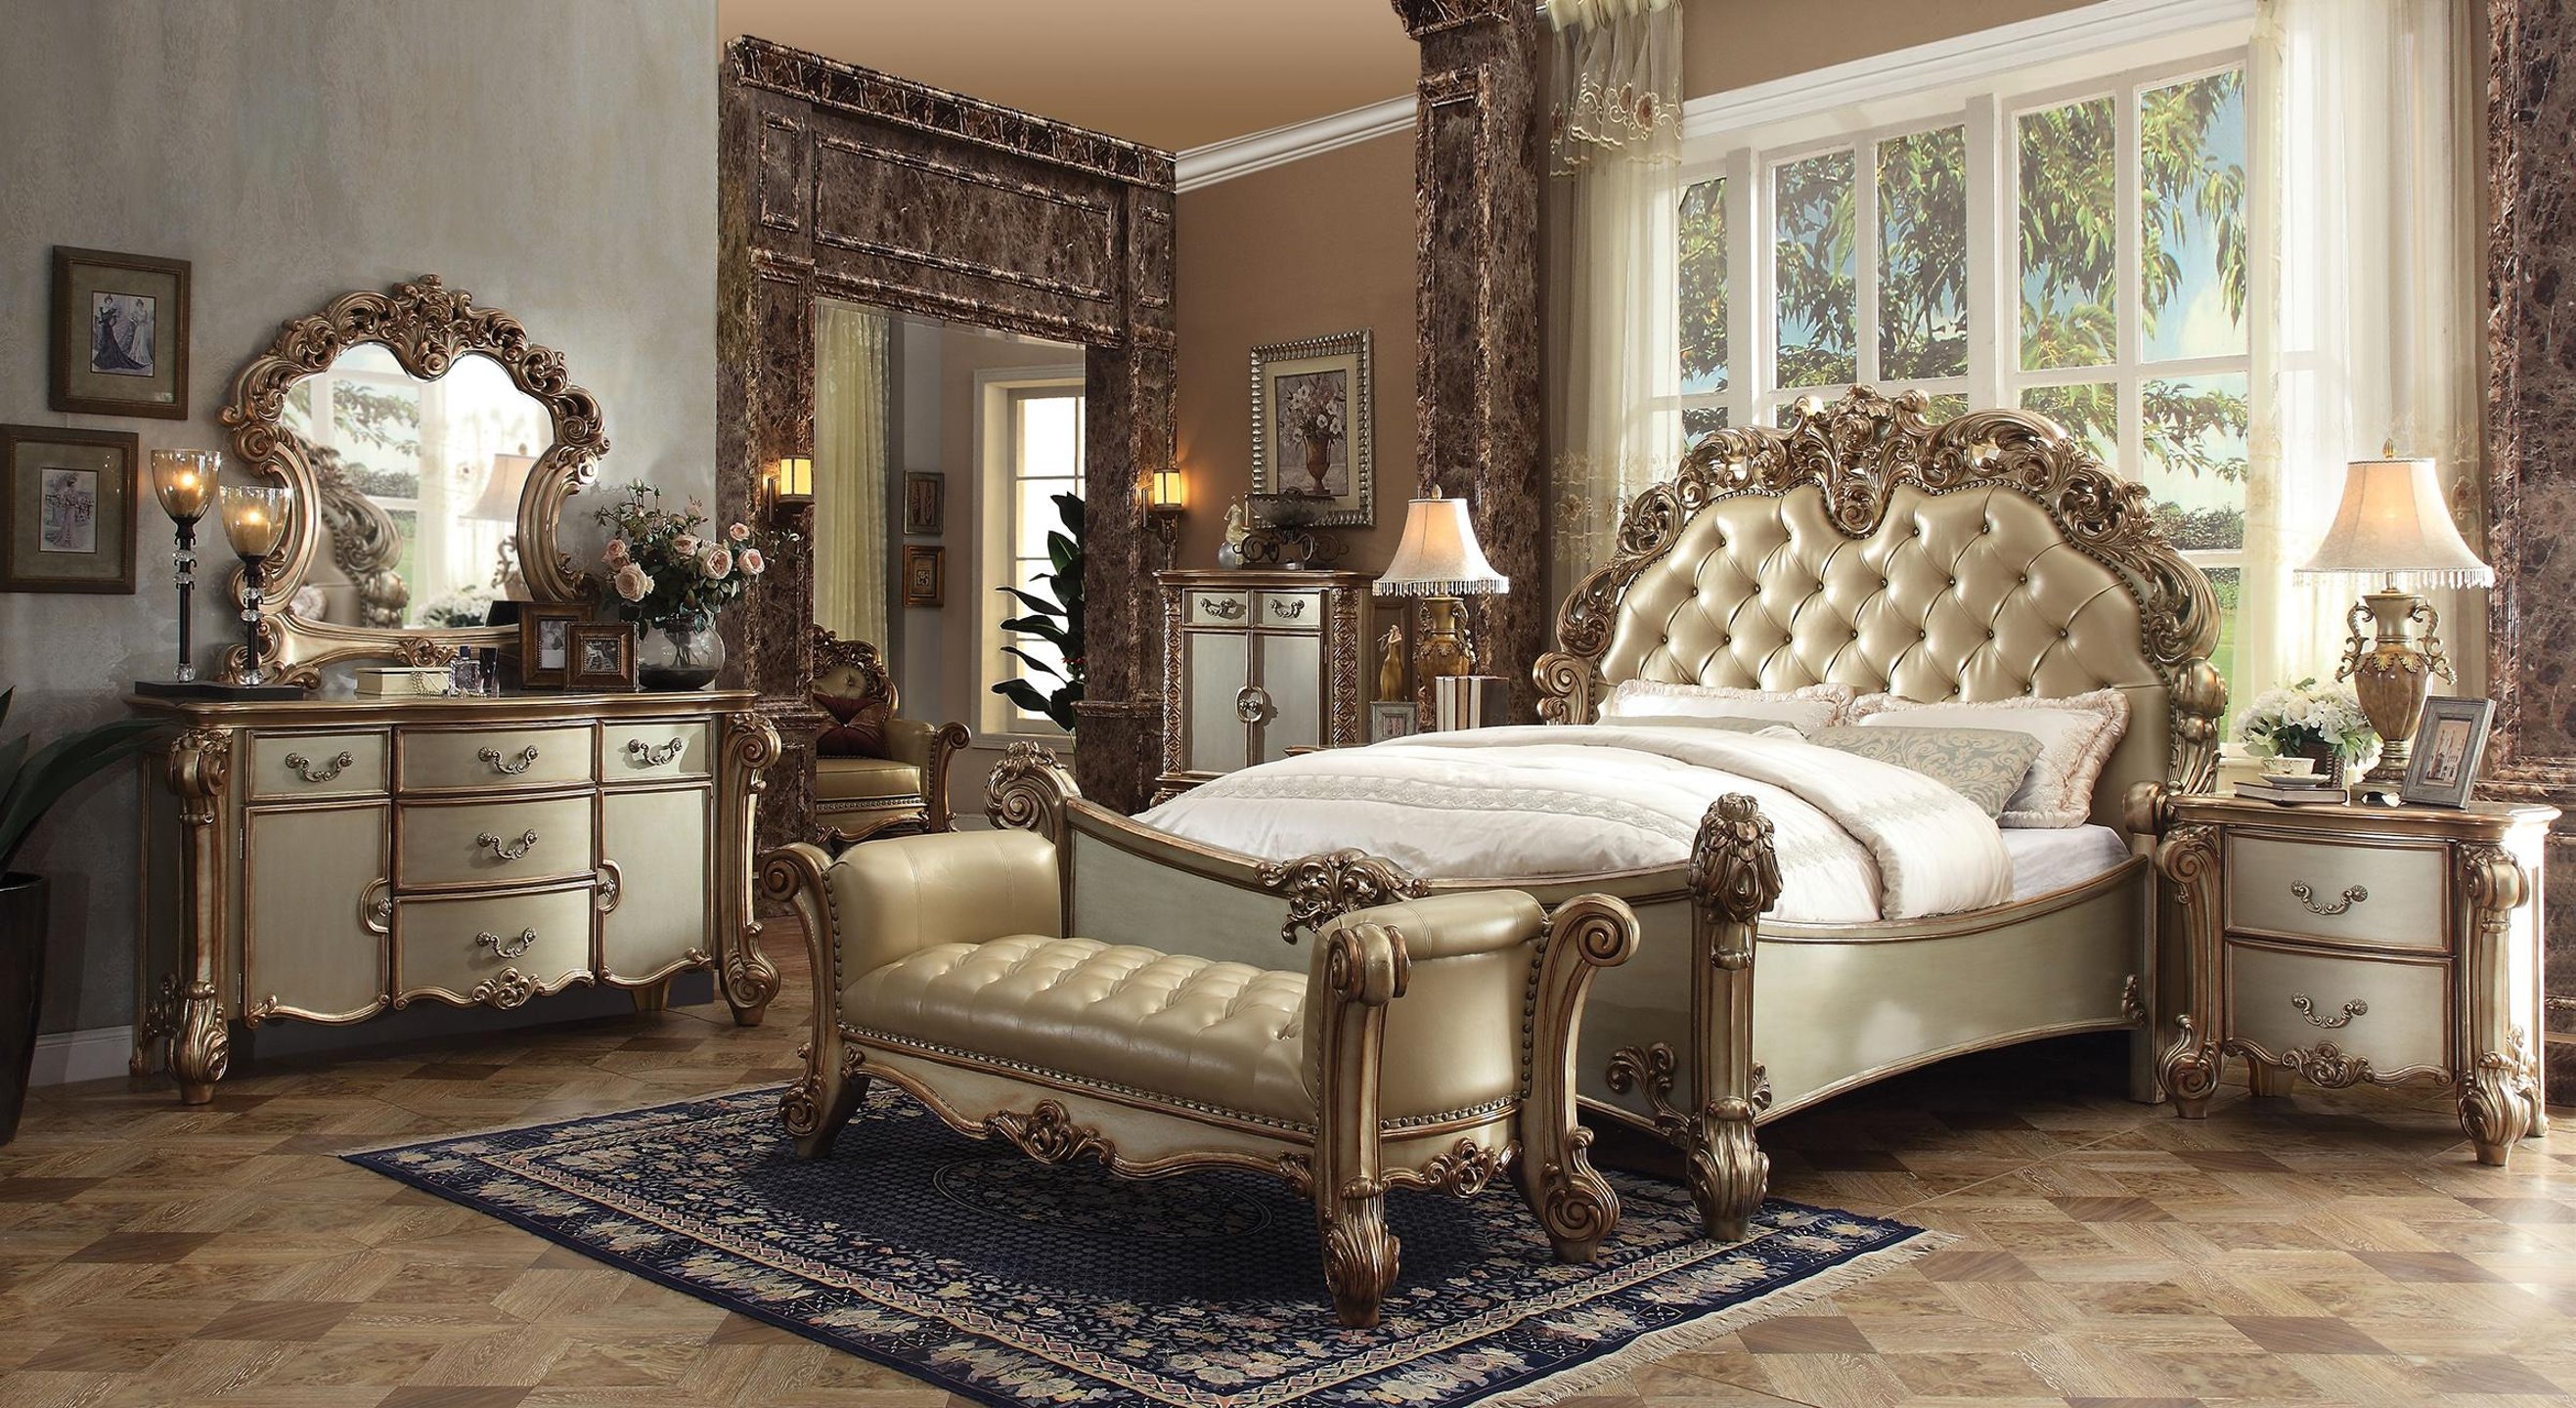 Contemporary Black Queen 6pcs Bedroom Set by Acme Louis Philippe III 19500Q-6pcs  – buy online on NY Furniture Outlet